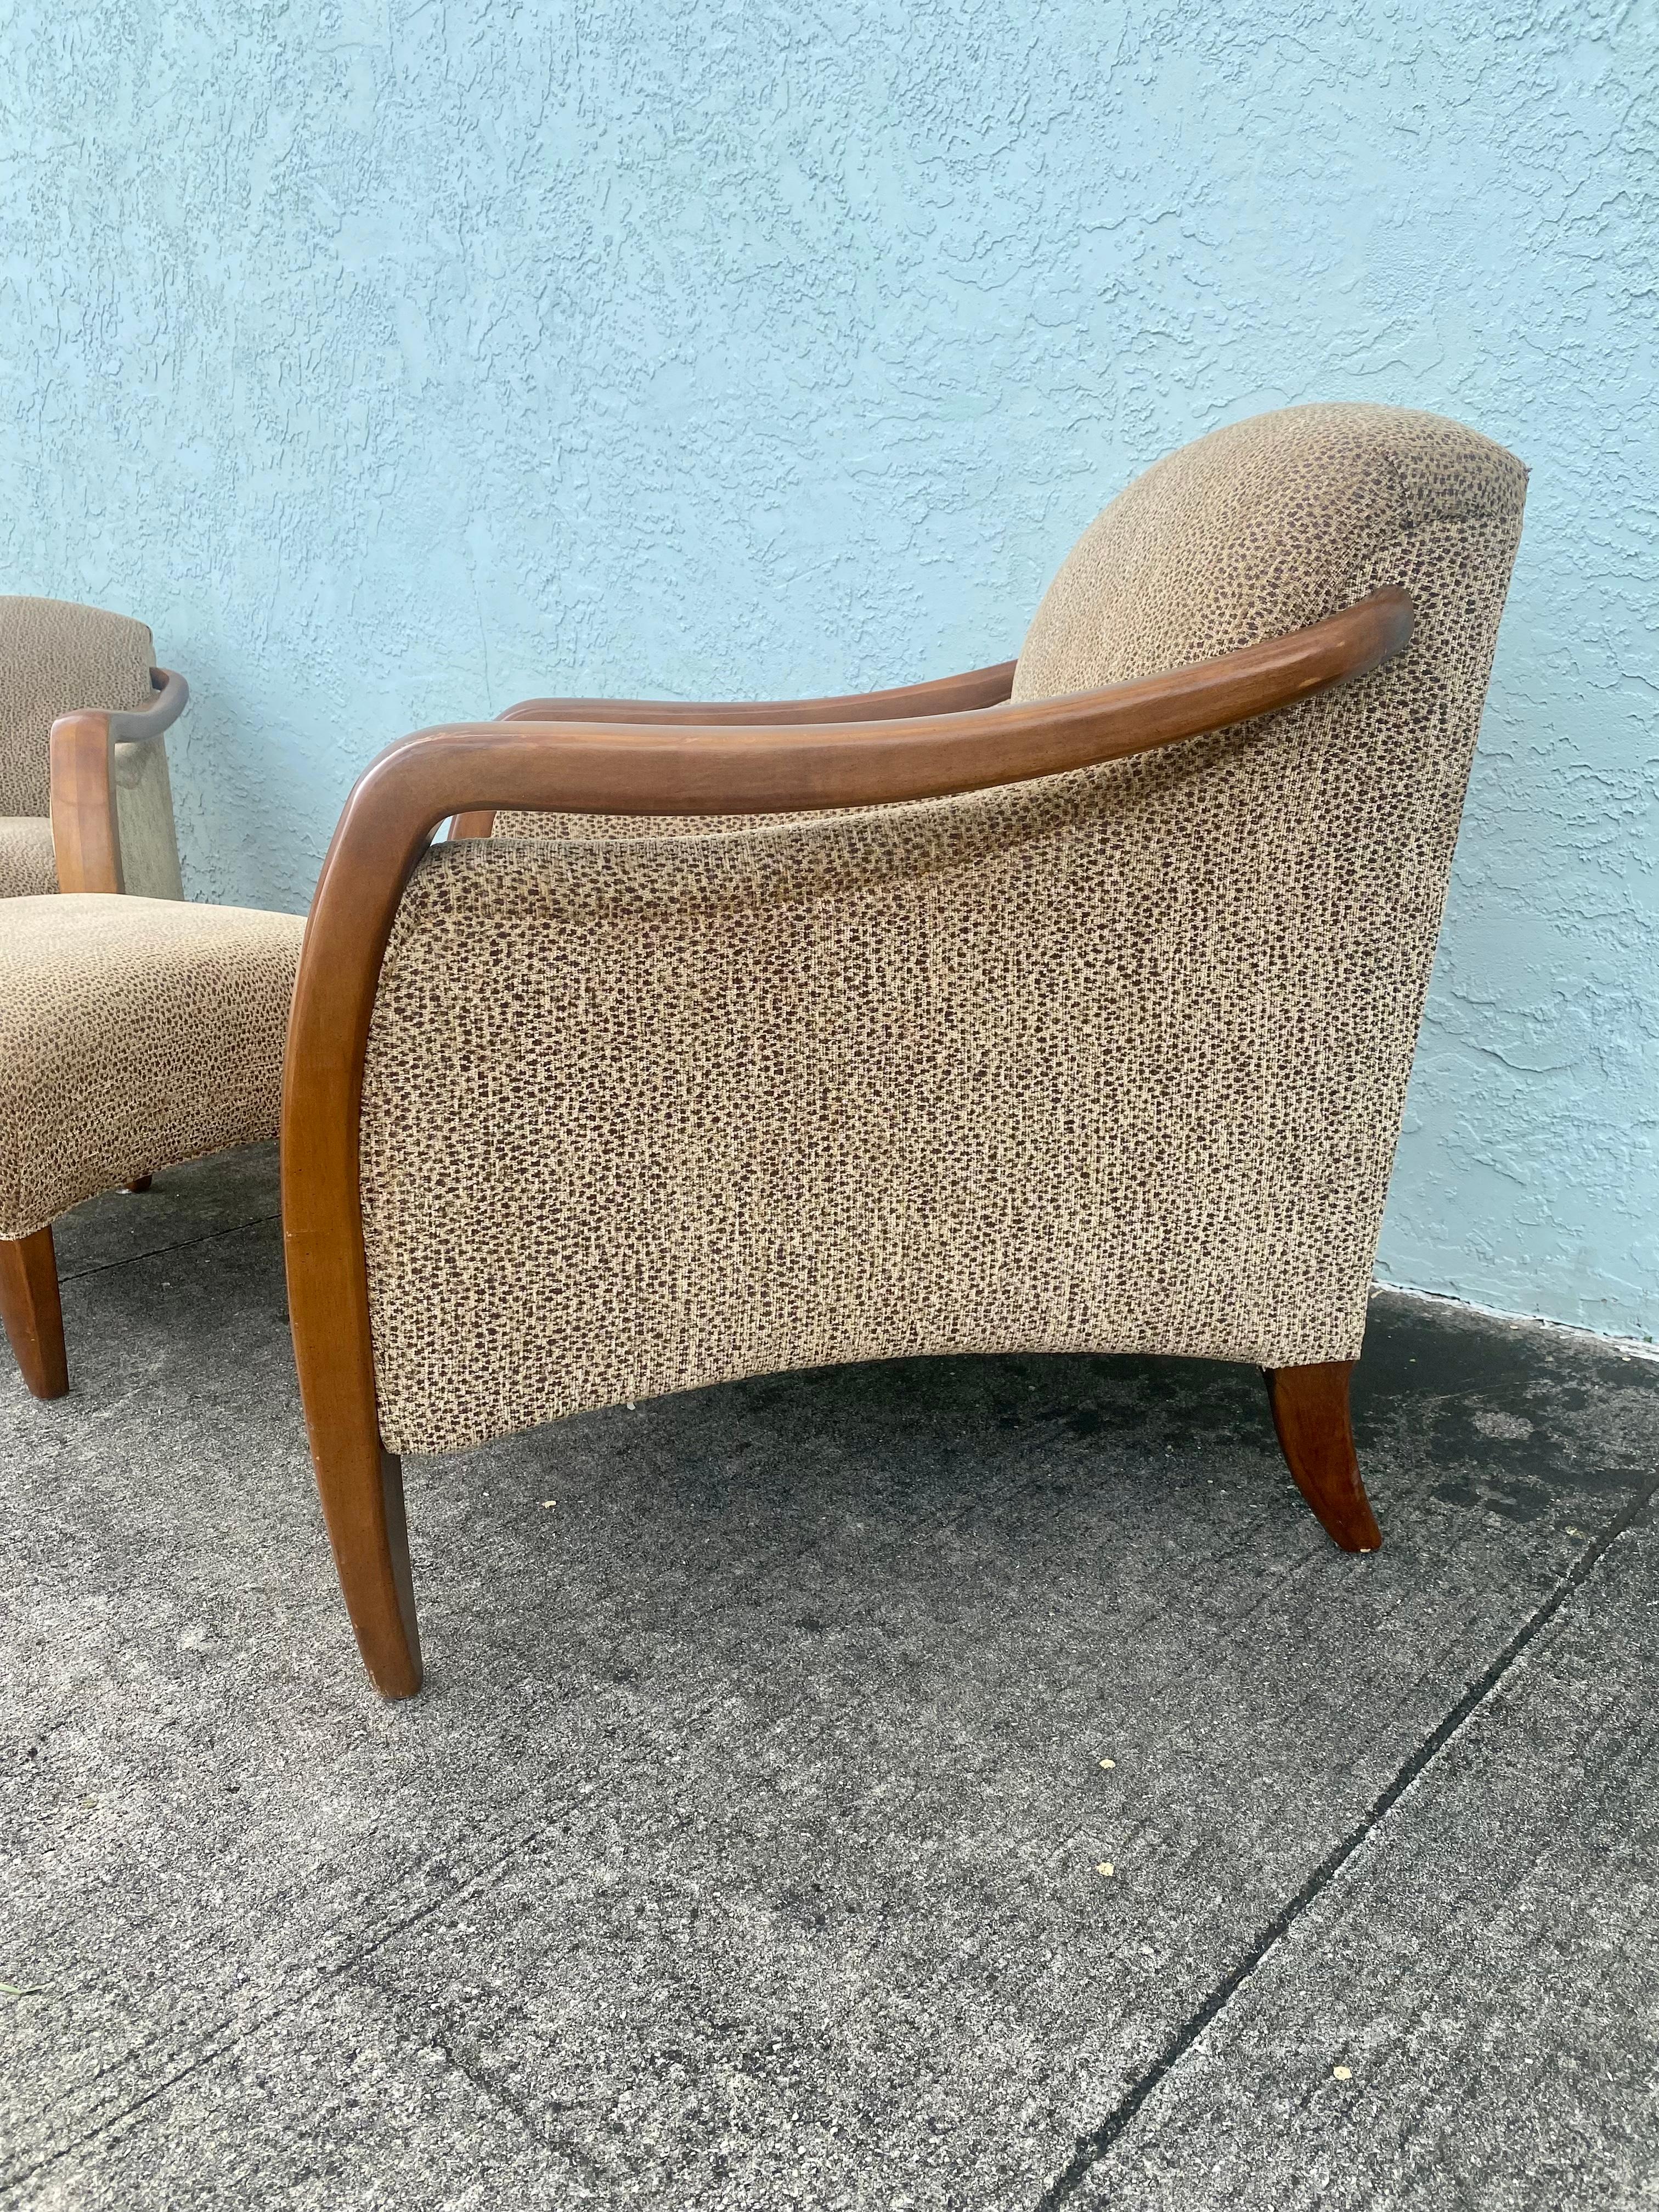 1980s Sculptural Leopard Tiger Wood Chairs and Ottoman, Set of 3 For Sale 3